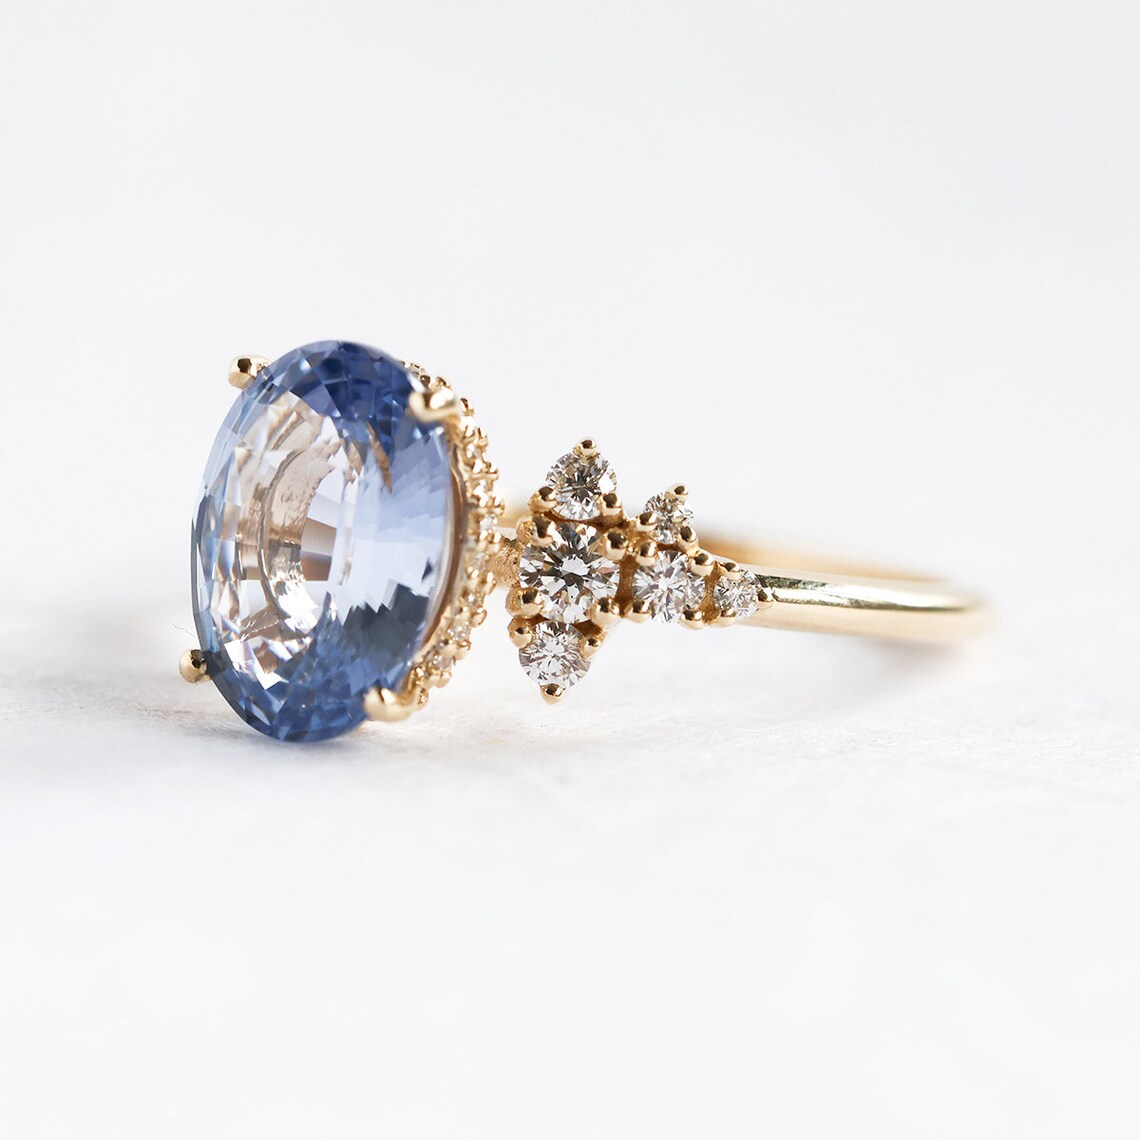 Oval-shaped blue sapphire ring with side diamonds